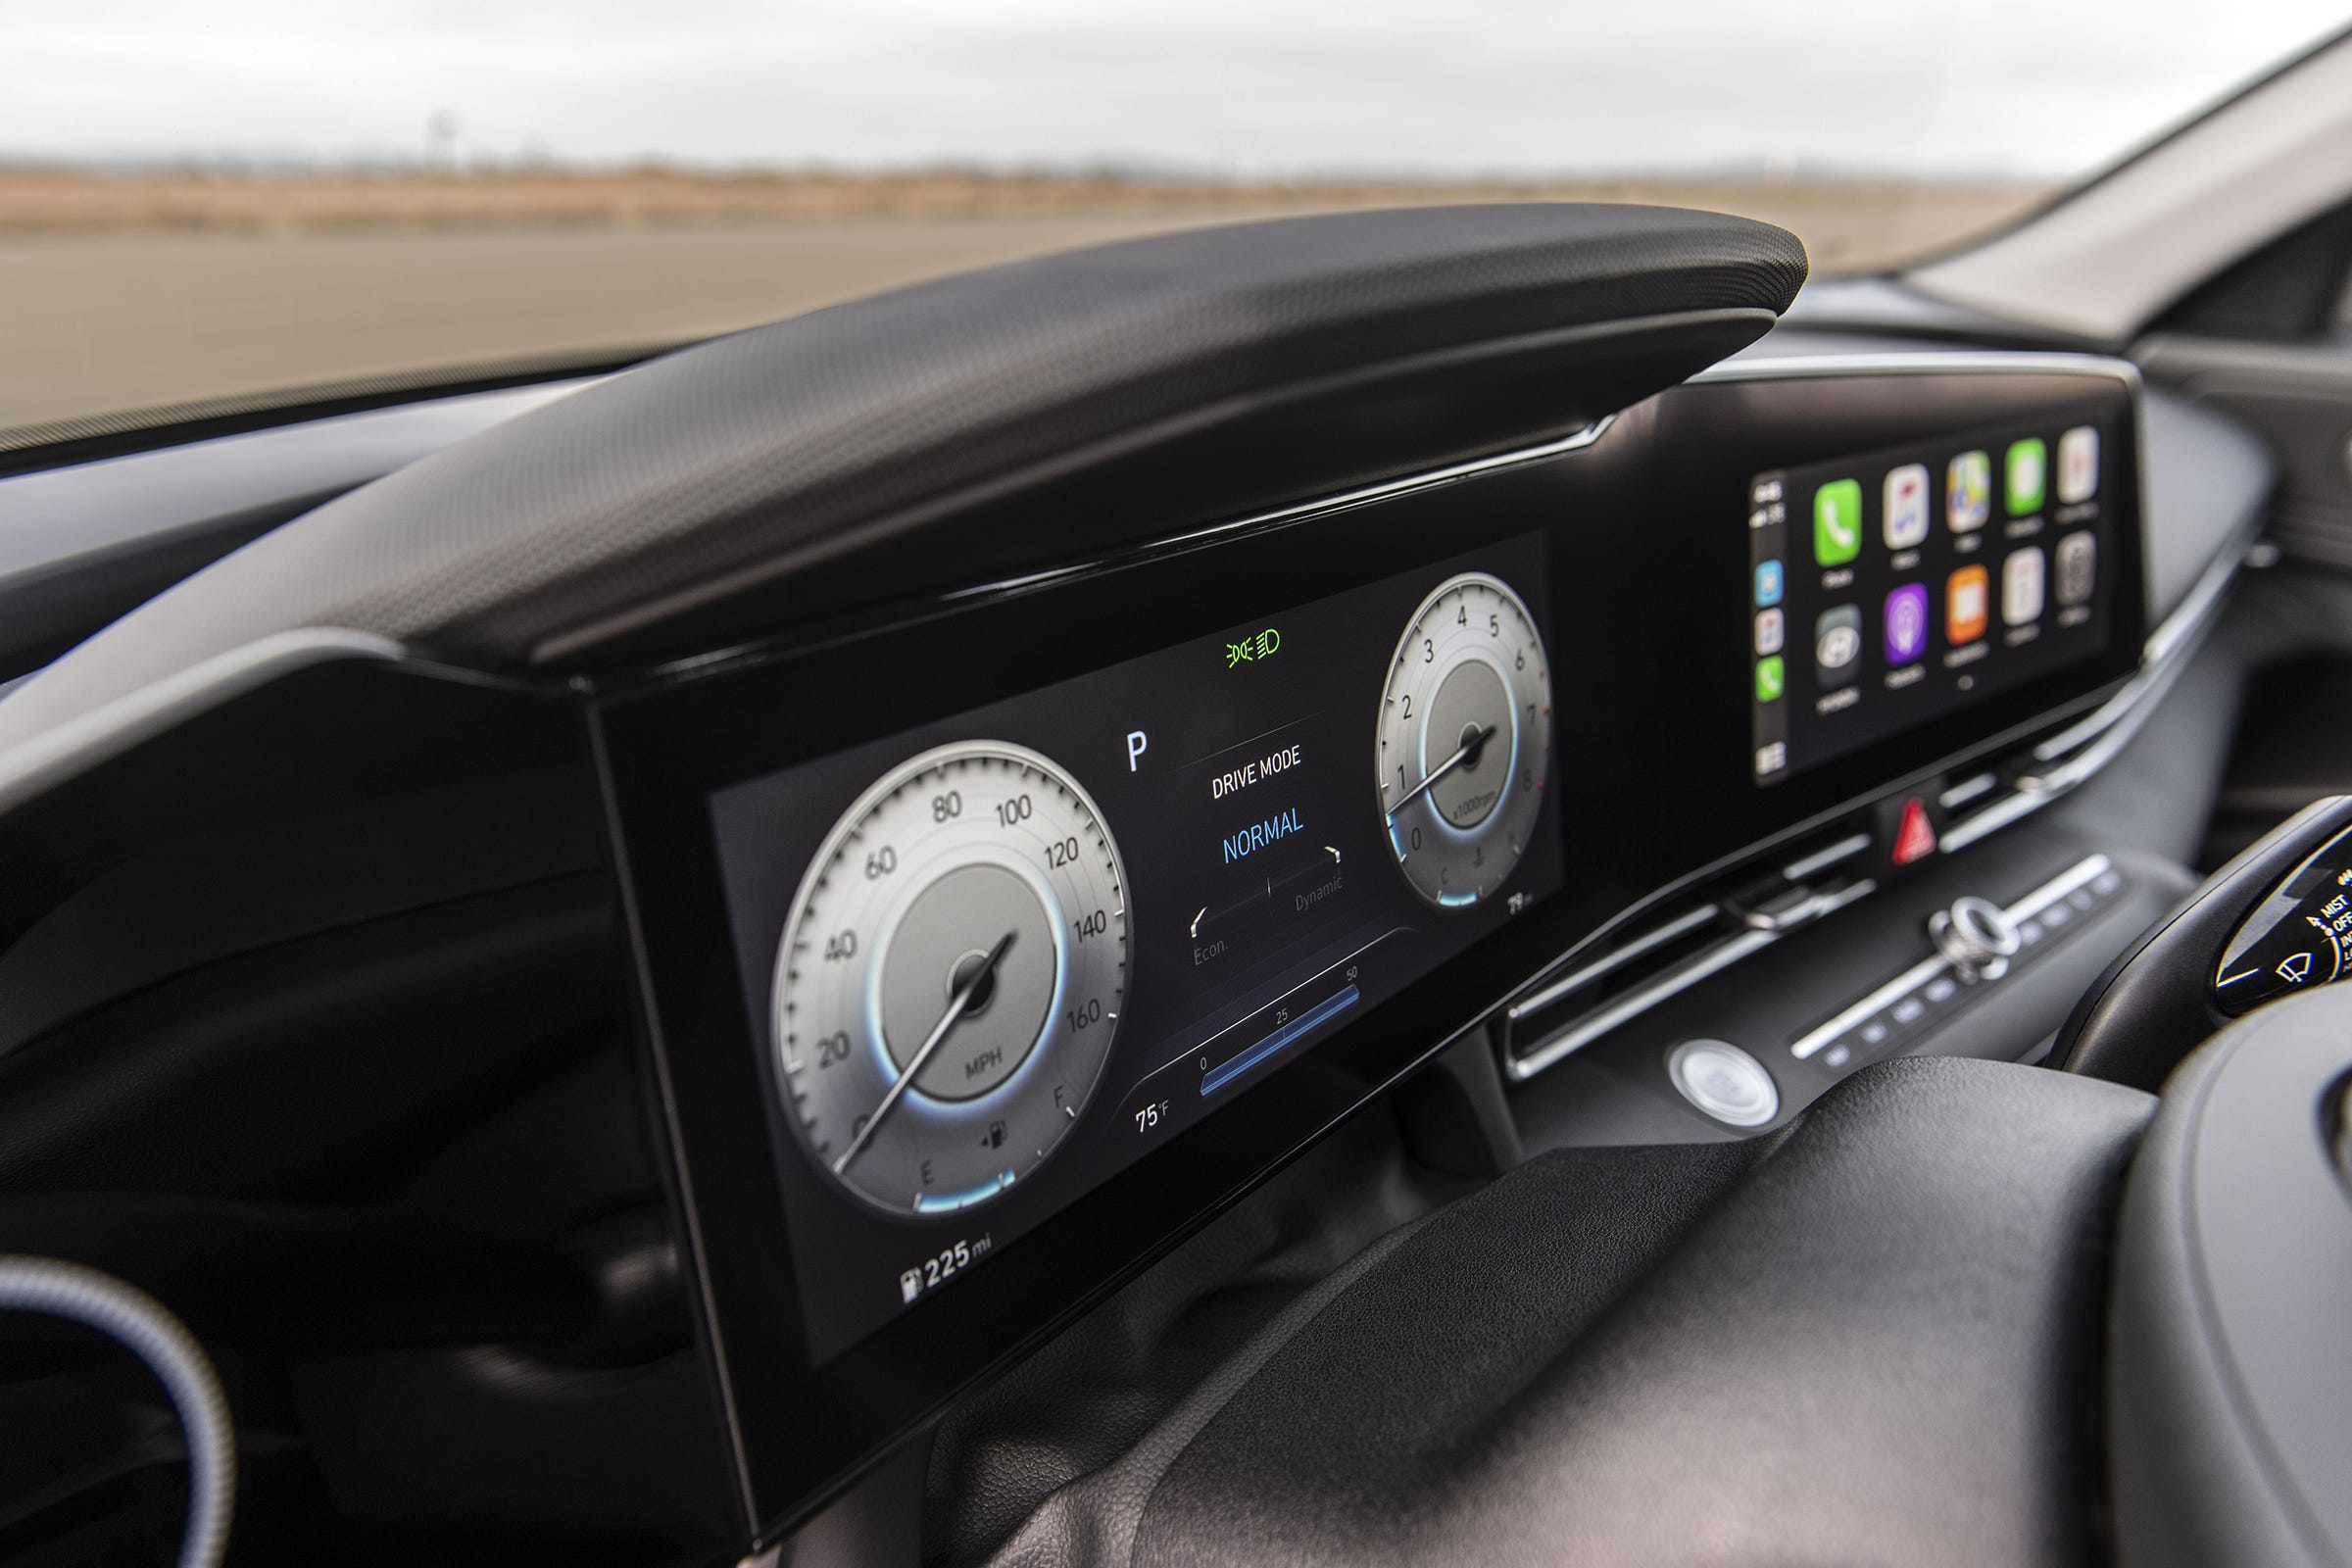 The 2021 Elantra offers simple, crystal clear gauges.